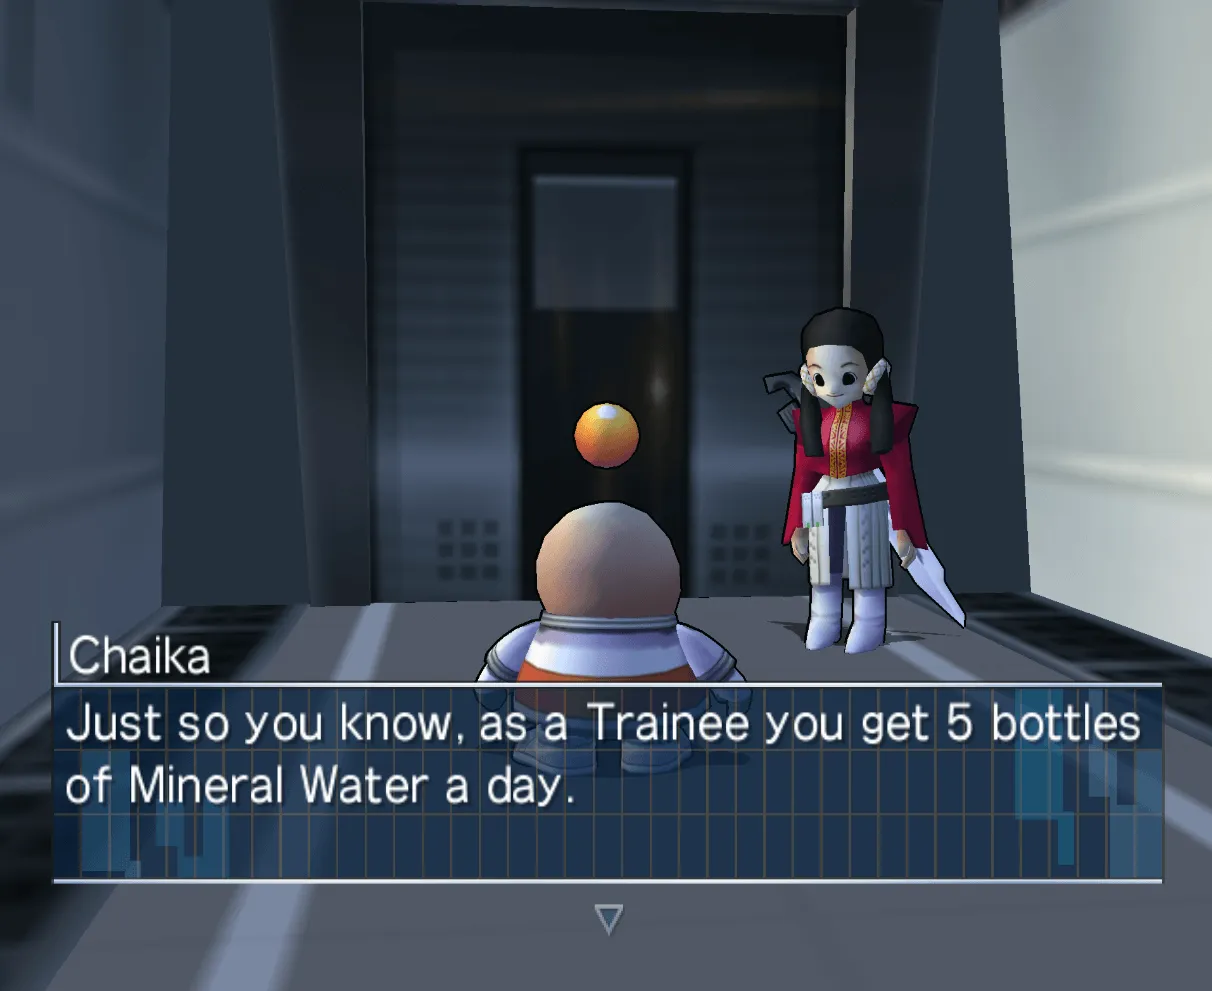 Opoona talking to Chaika. The dialogue reads: Just so you know, as a Trainee you get 5 bottles of Mineral Water a day.